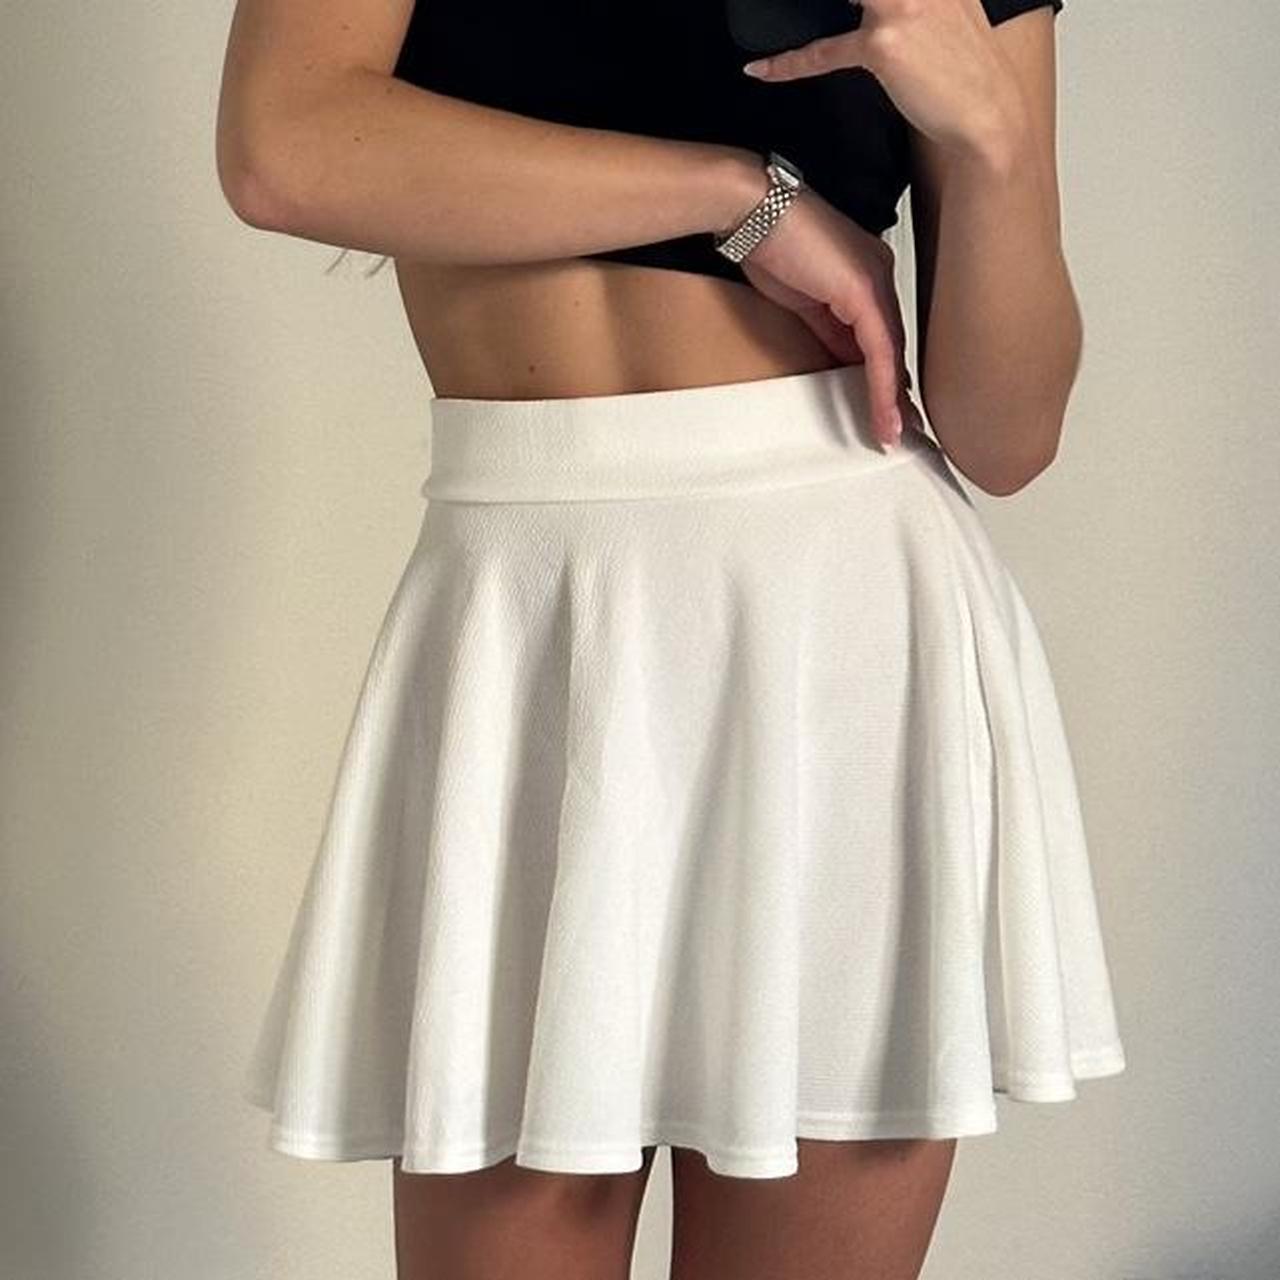 Flared Stretchy Mini Skater Skirt new with tags ... - Depop